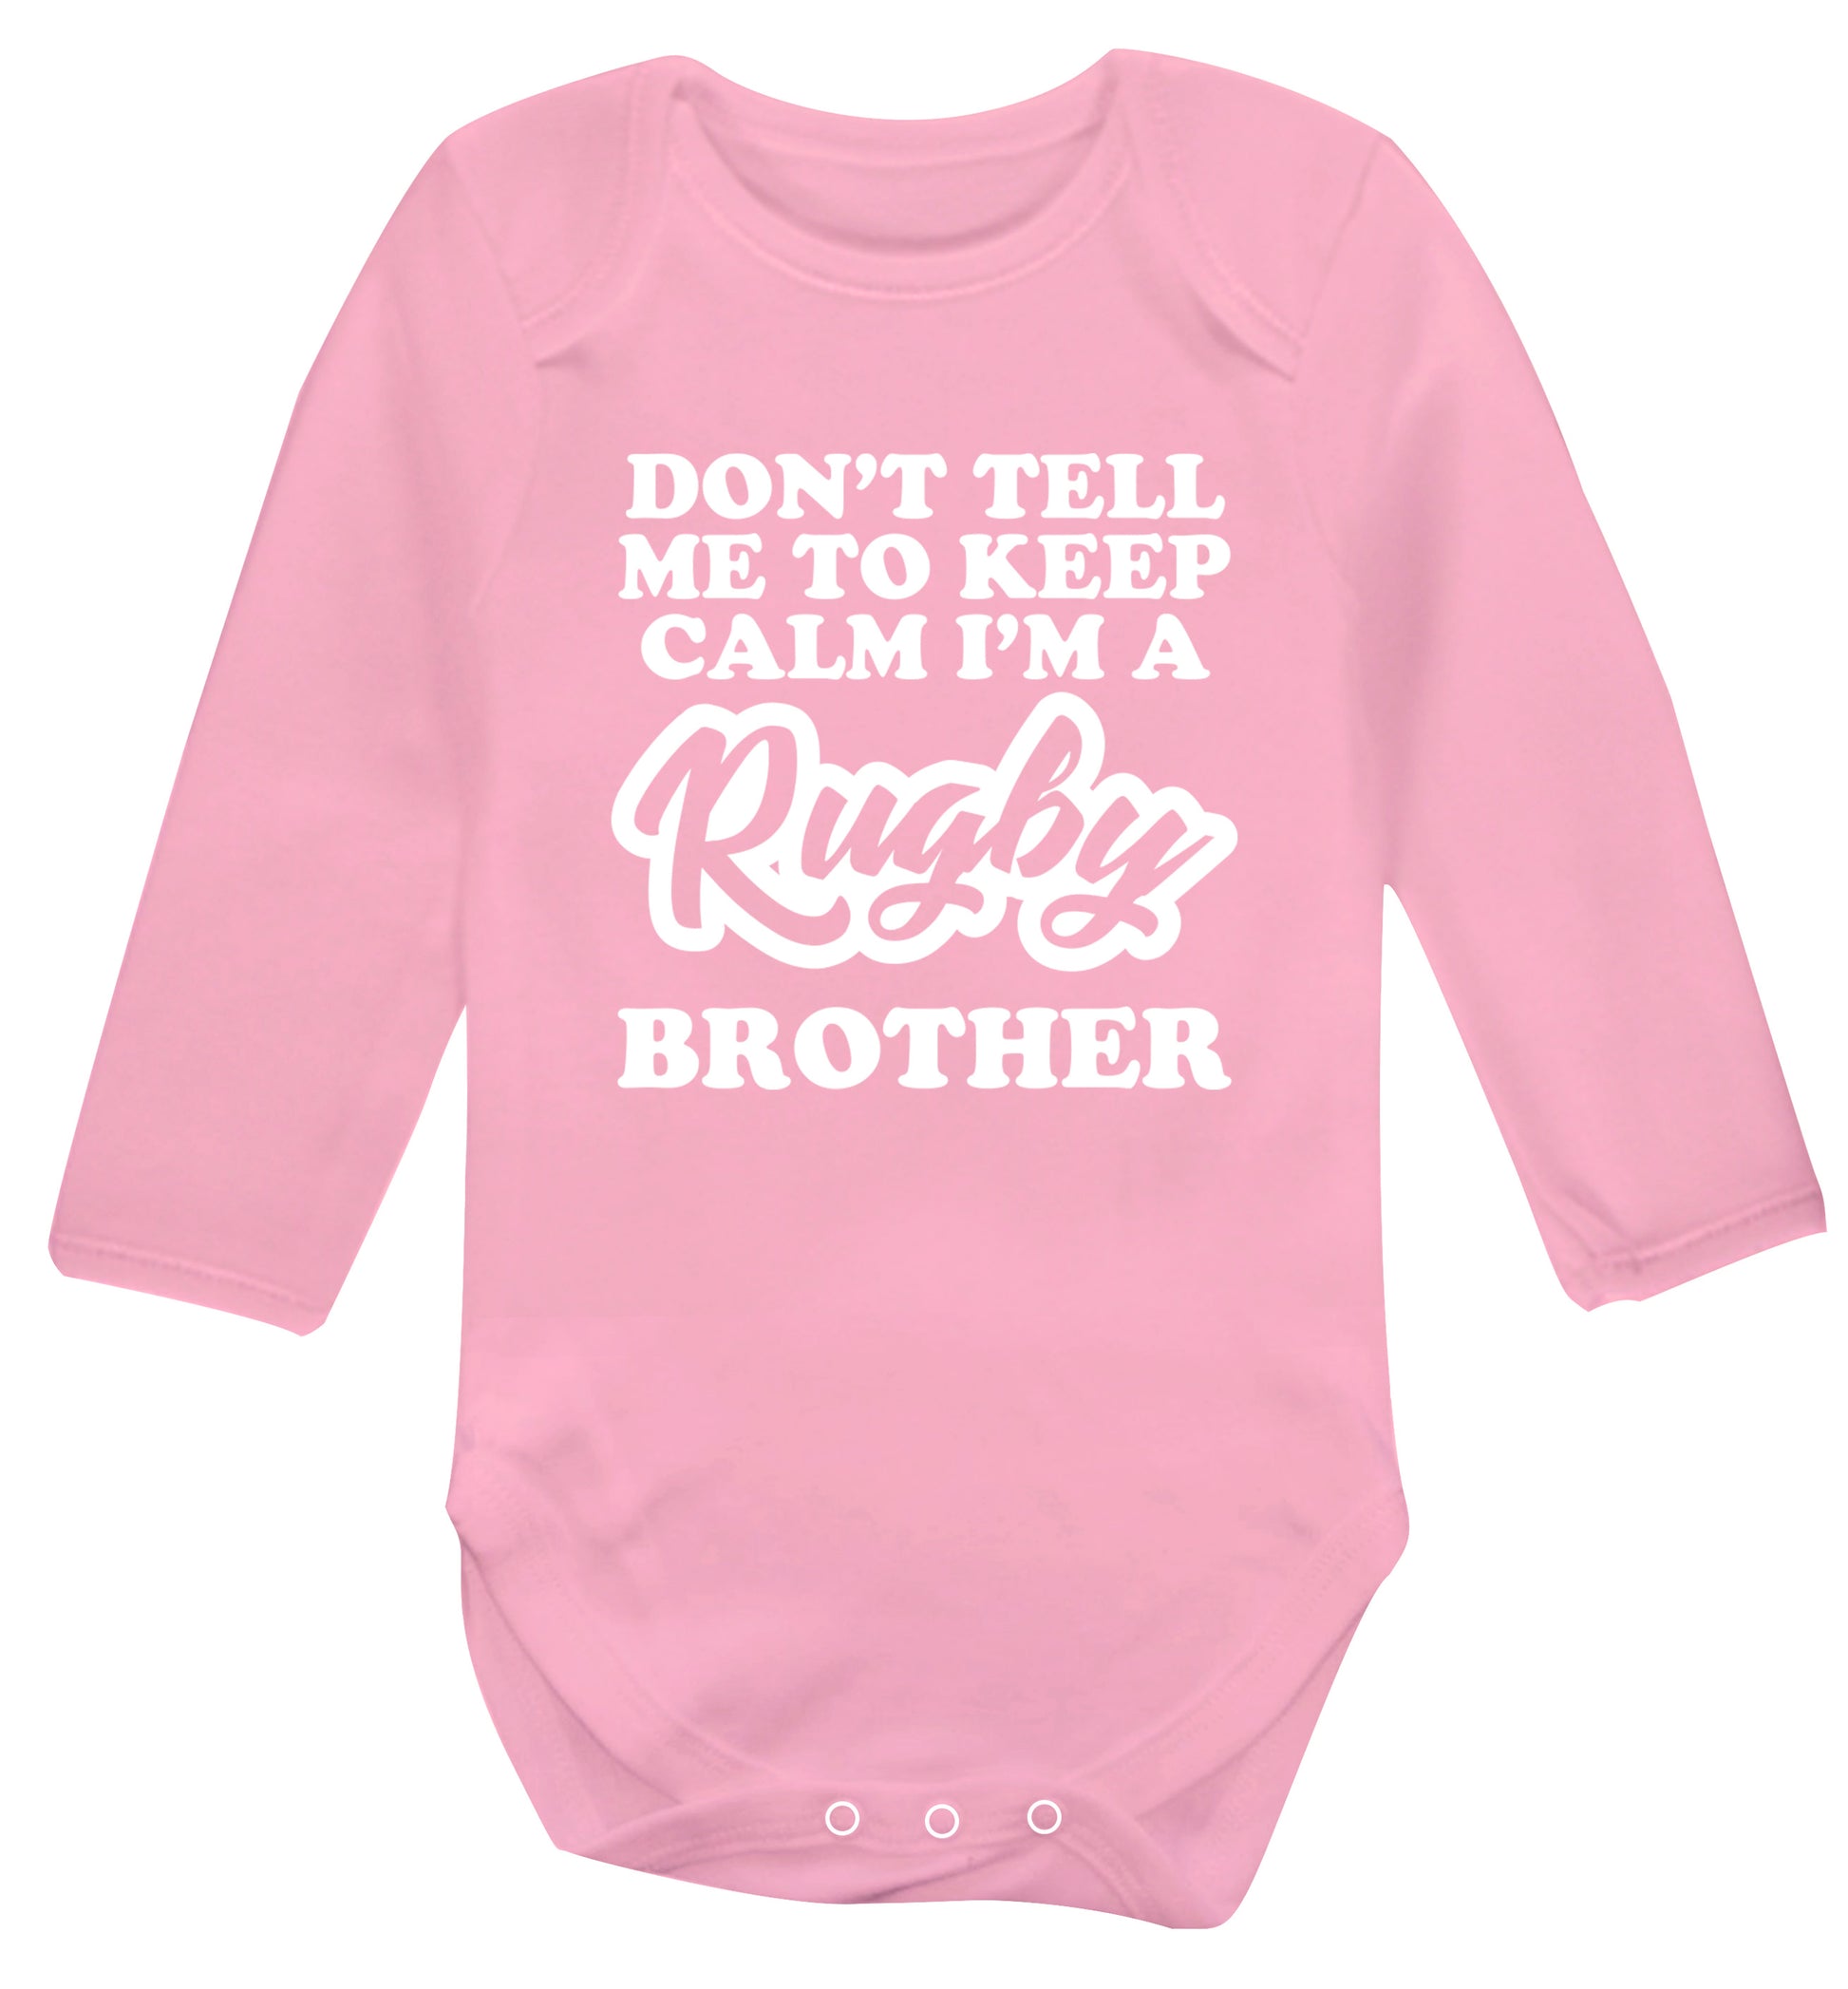 Don't tell me keep calm I'm a rugby brother Baby Vest long sleeved pale pink 6-12 months